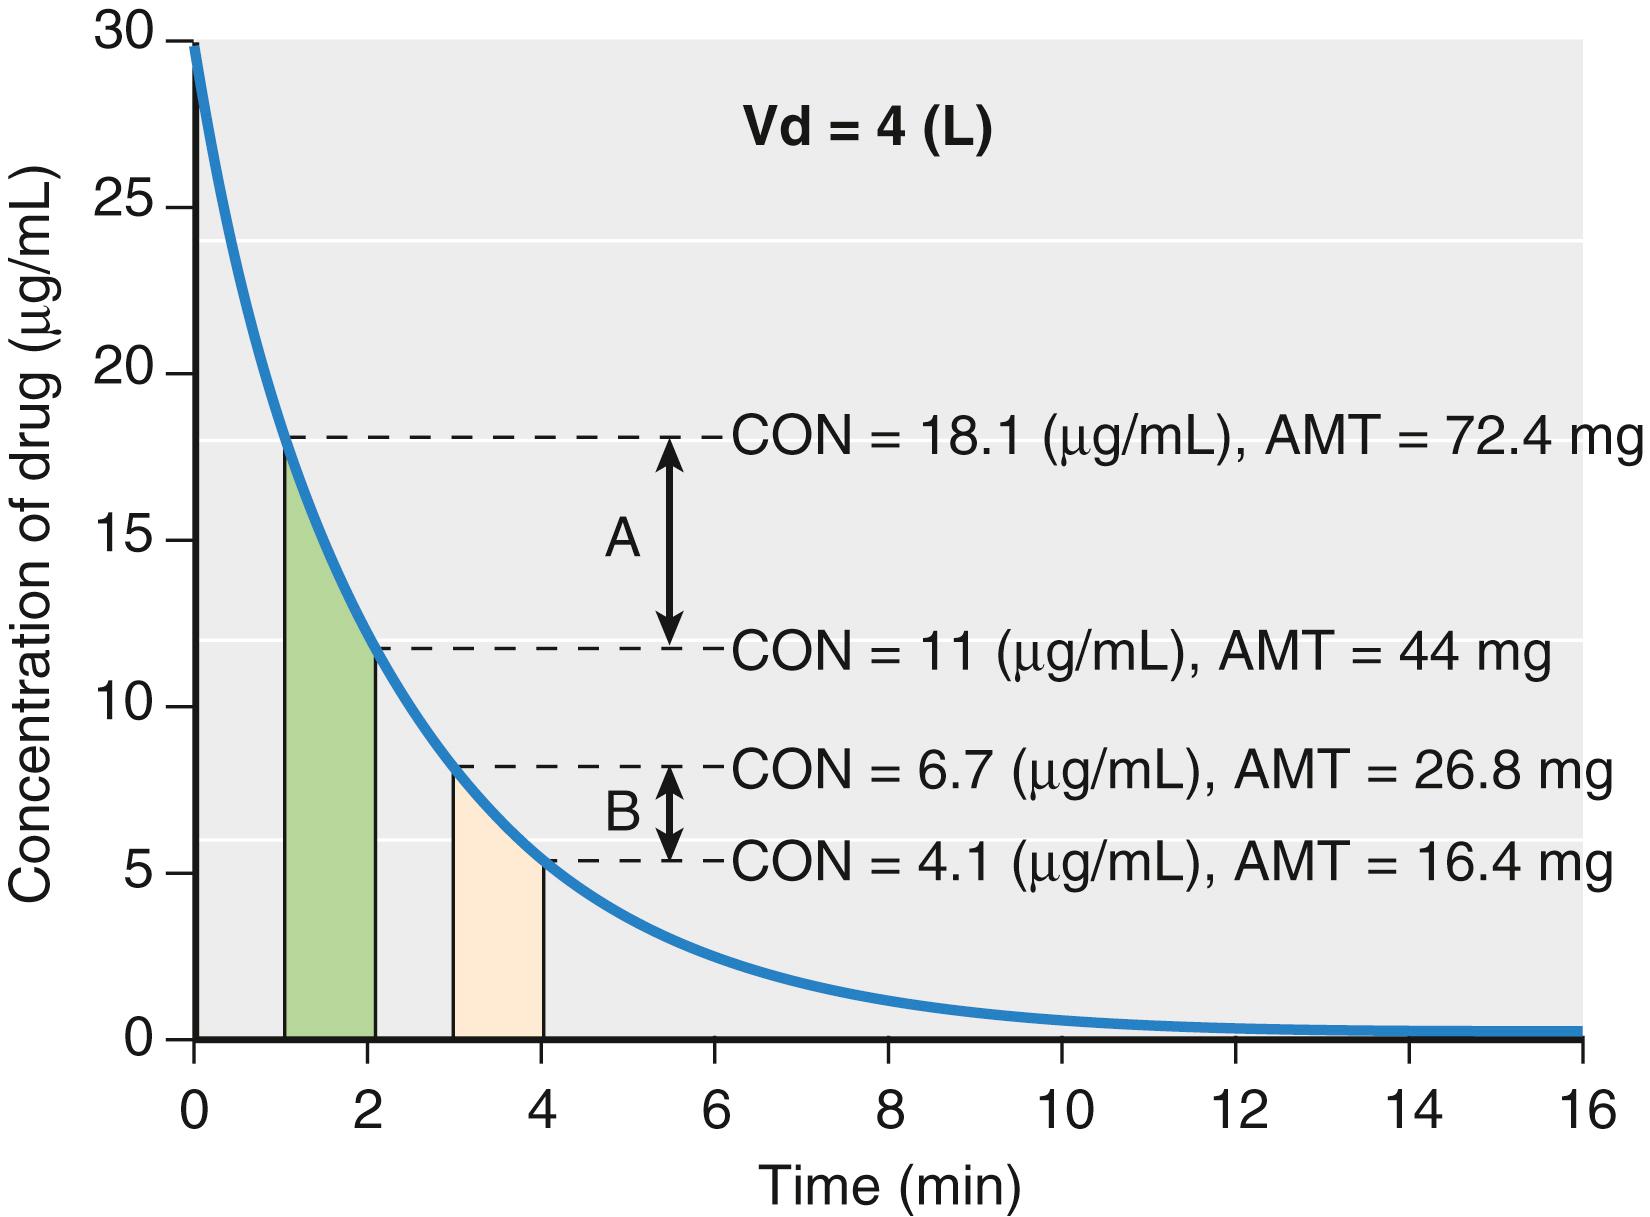 Fig.18.7, Simulation of drug concentration changes when a drug is administered to a single-tank model with first-order elimination (see Fig. 18.2 ). The concentration changes for two time windows are labeled with dashed lines from 1 to 2 minutes (time window A ) and from 3 to 4 minutes (time window B ), respectively. The concentrations (CON) at the beginning and end of each time window are used to calculate the amount (AMT) of drug that is eliminated (see text). Vd , Volume of distribution.